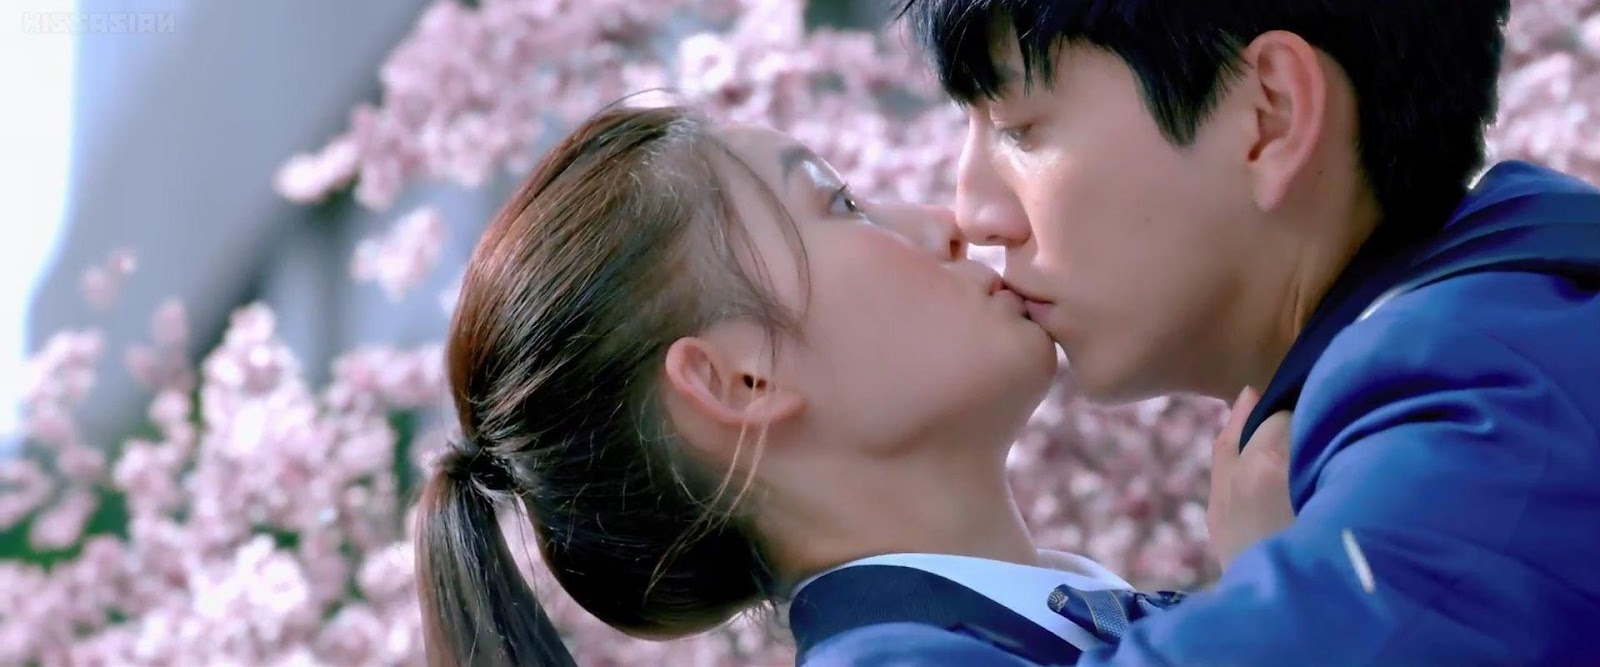 4. FALL IN LOVE AT FIRST KISS 04